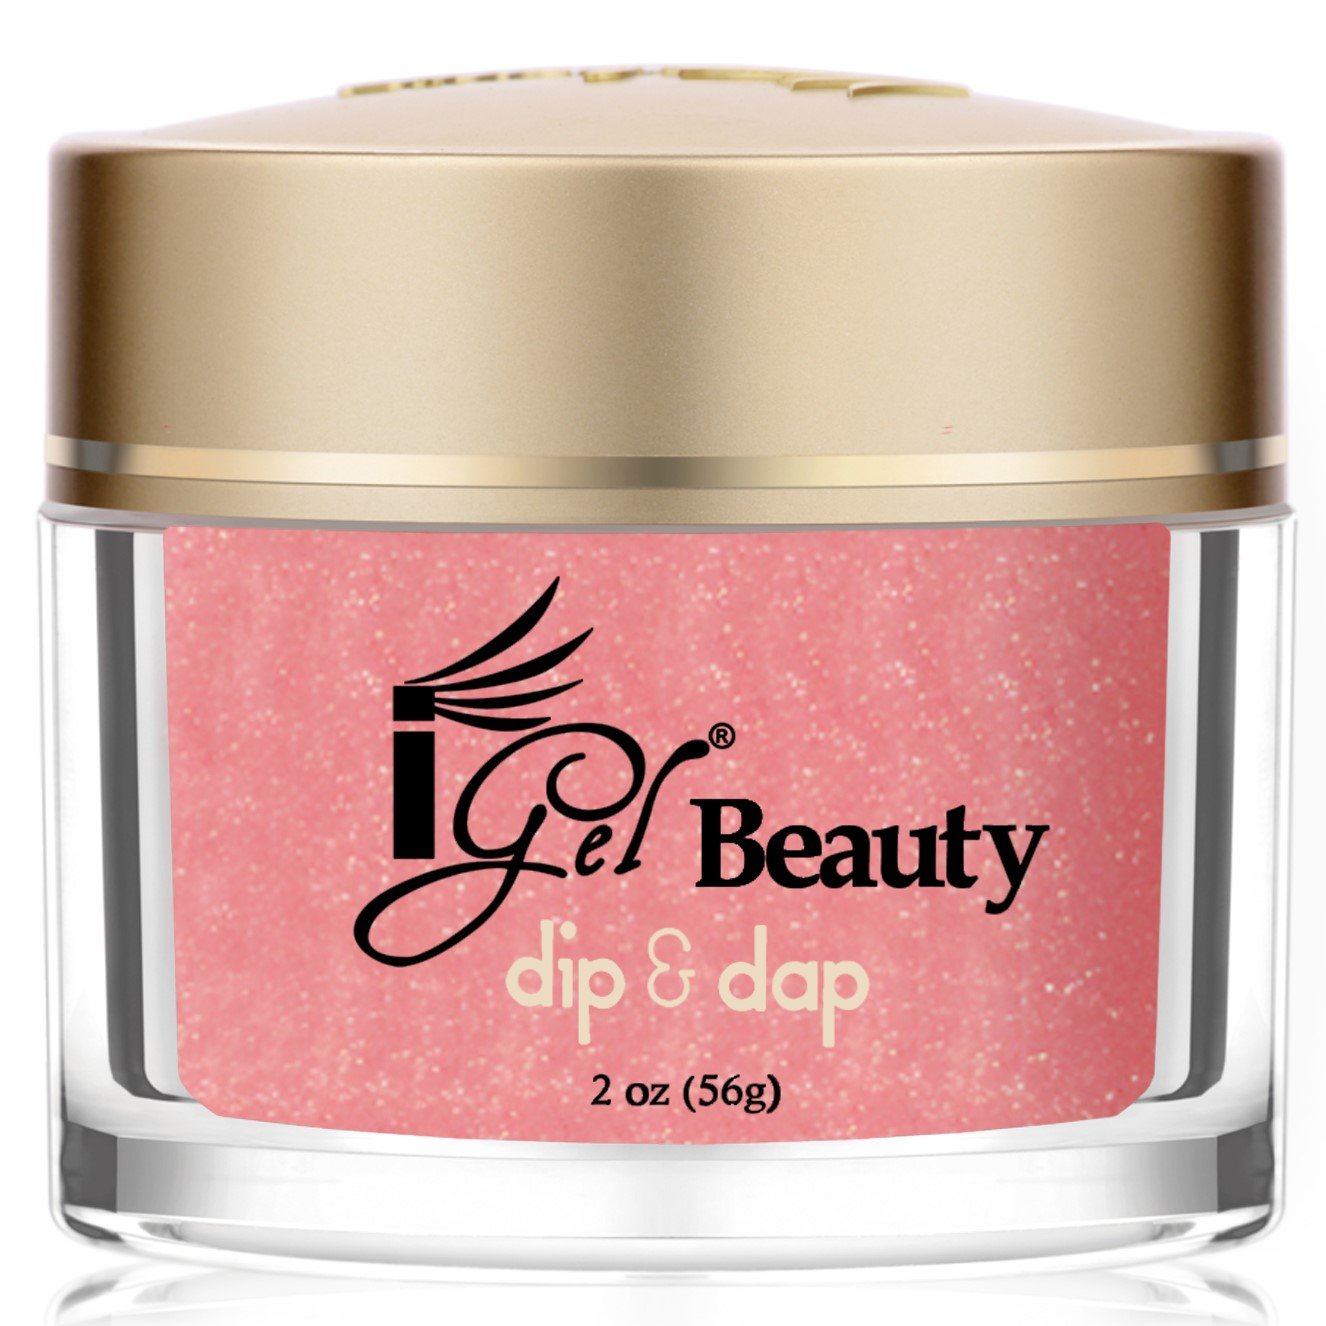 iGel Beauty - Dip & Dap Powder - DD144 Pink Champagne - RECOMMENDED FOR DIP